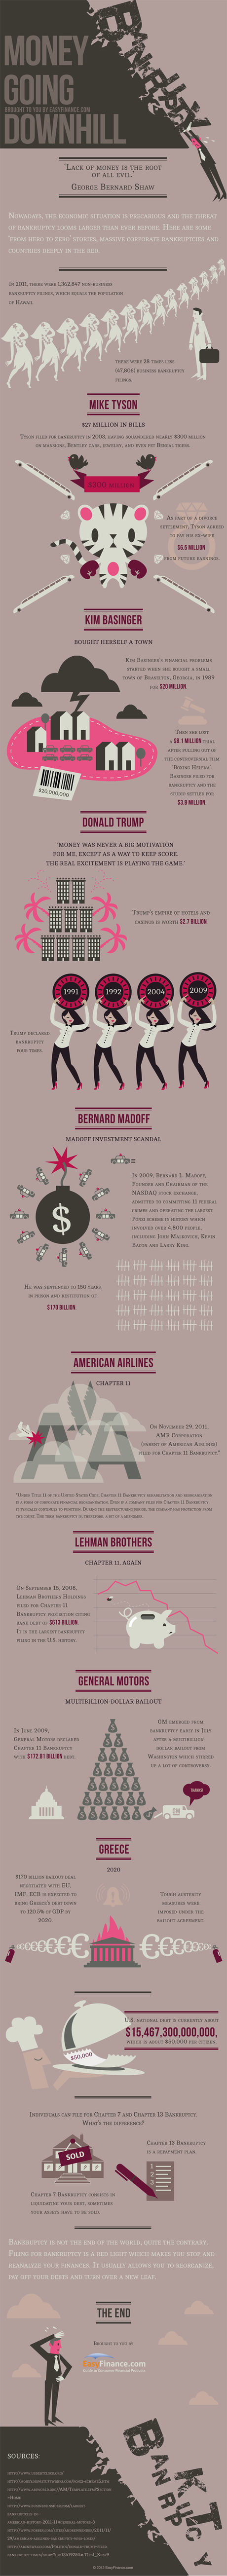 Celebrity Bankruptcy Infographic